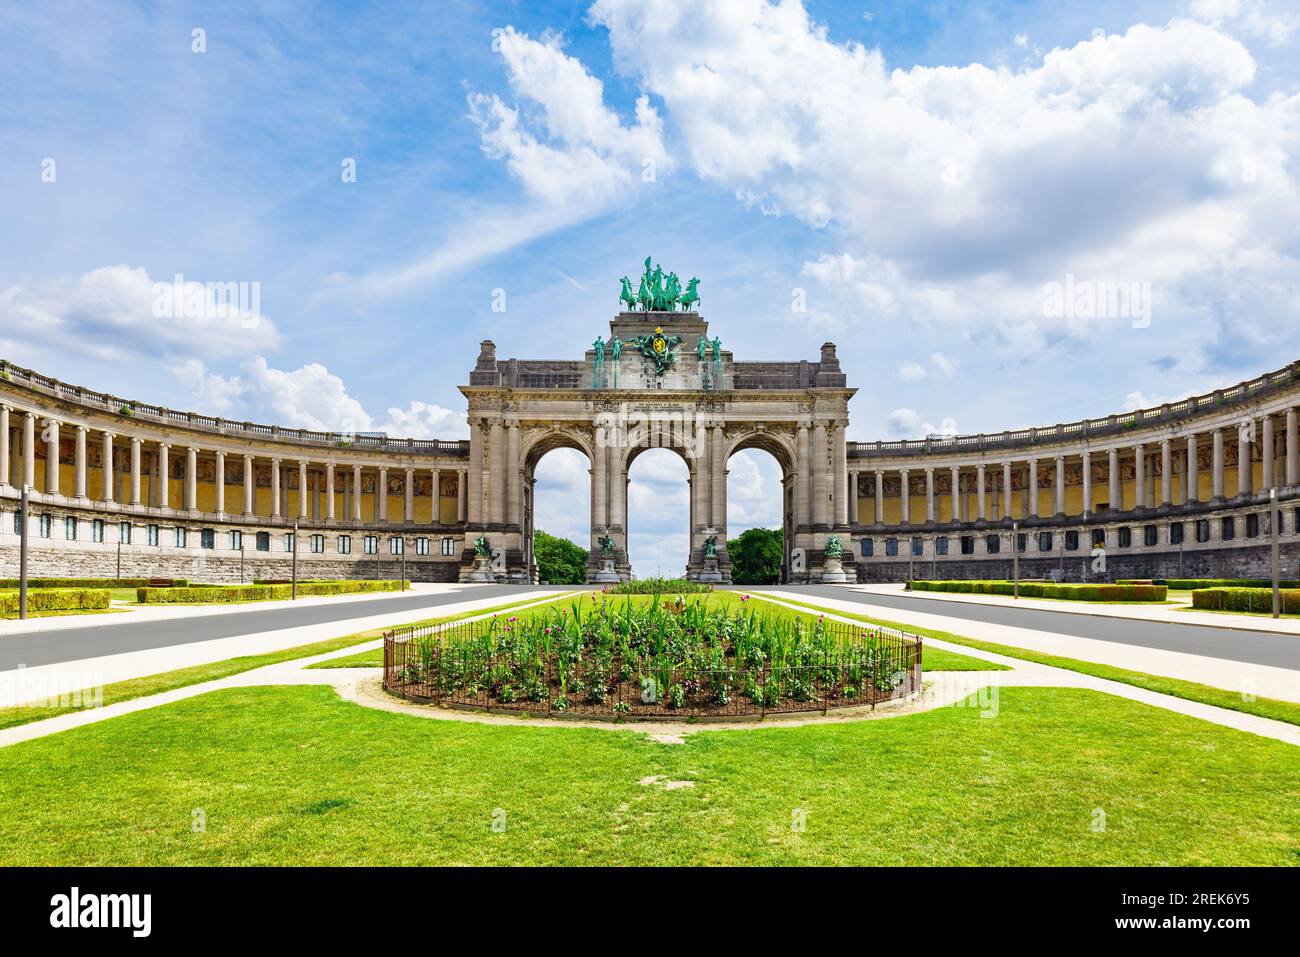 The Cinquantenaire Memorial Arcade in the centre of the Parc du Cinquantenaire, Brussels, Belgium with the text 'This monument was erected in 1905 for Stock Photo